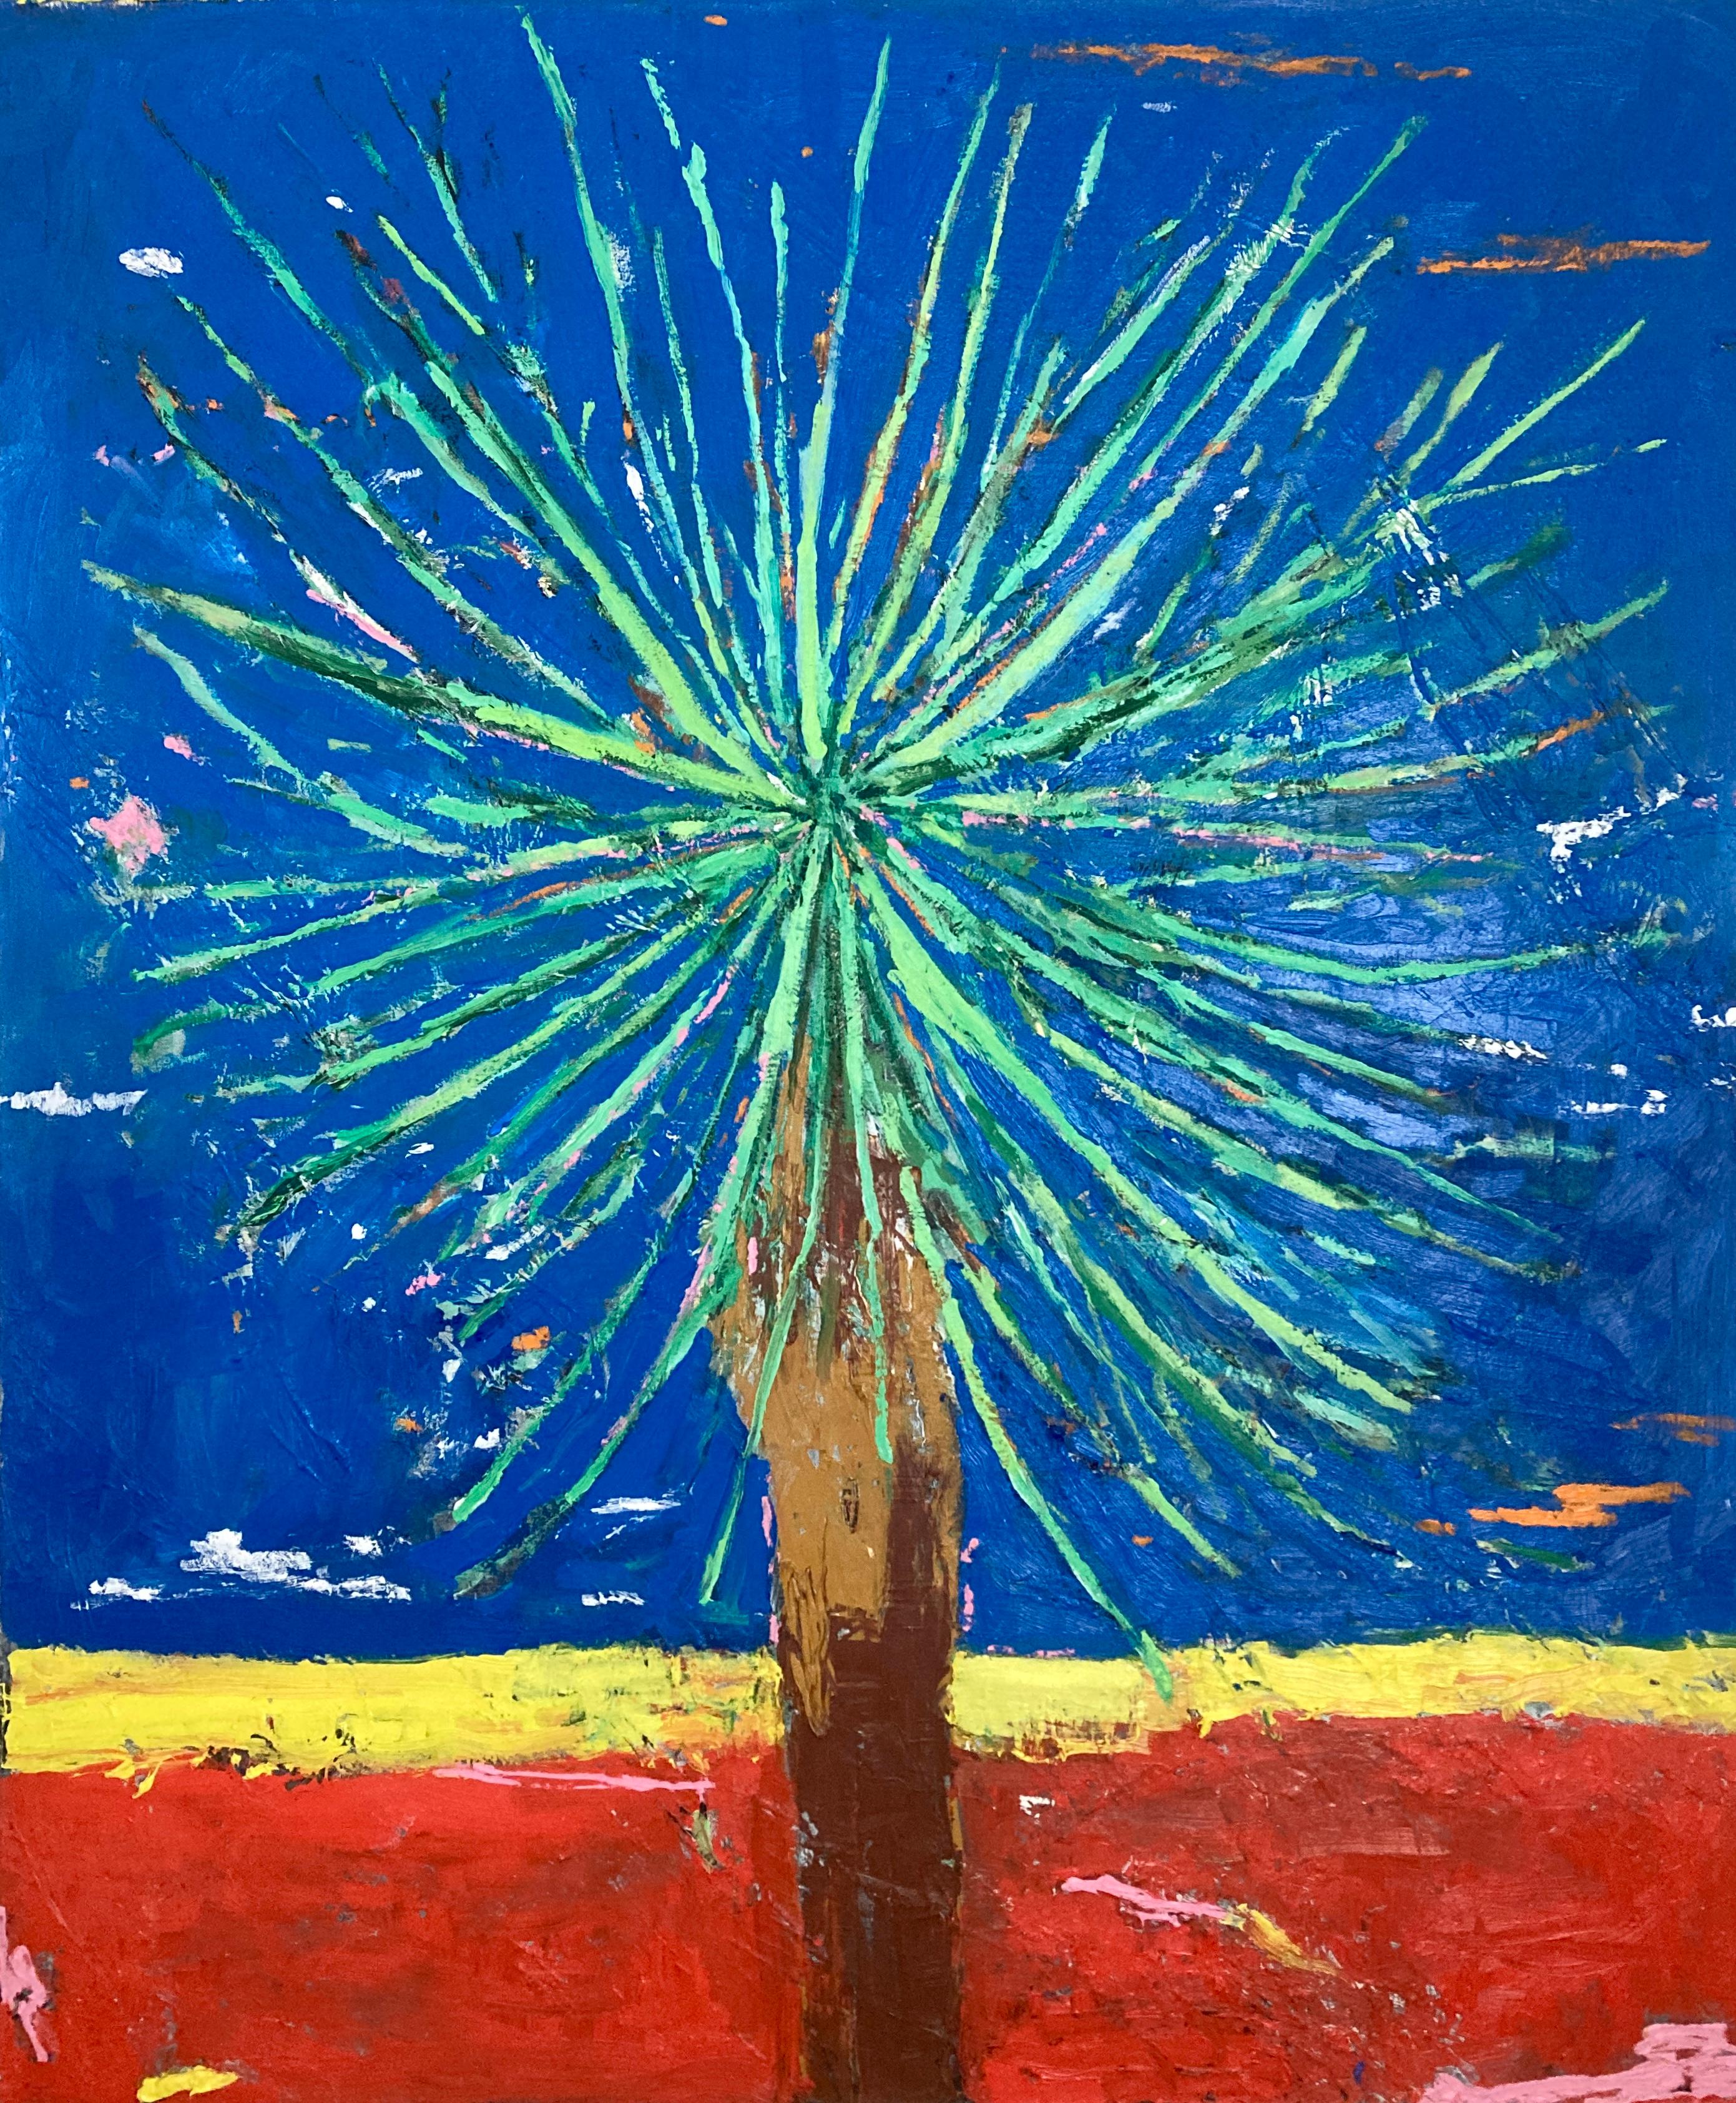 Untitled (Palm 2) is an oil on canvas painting that exudes a sense of joy, lightness, and radiance. The artwork features a prominently displayed palm plant as its central subject, rendered with bold primary colors and a heavily textured